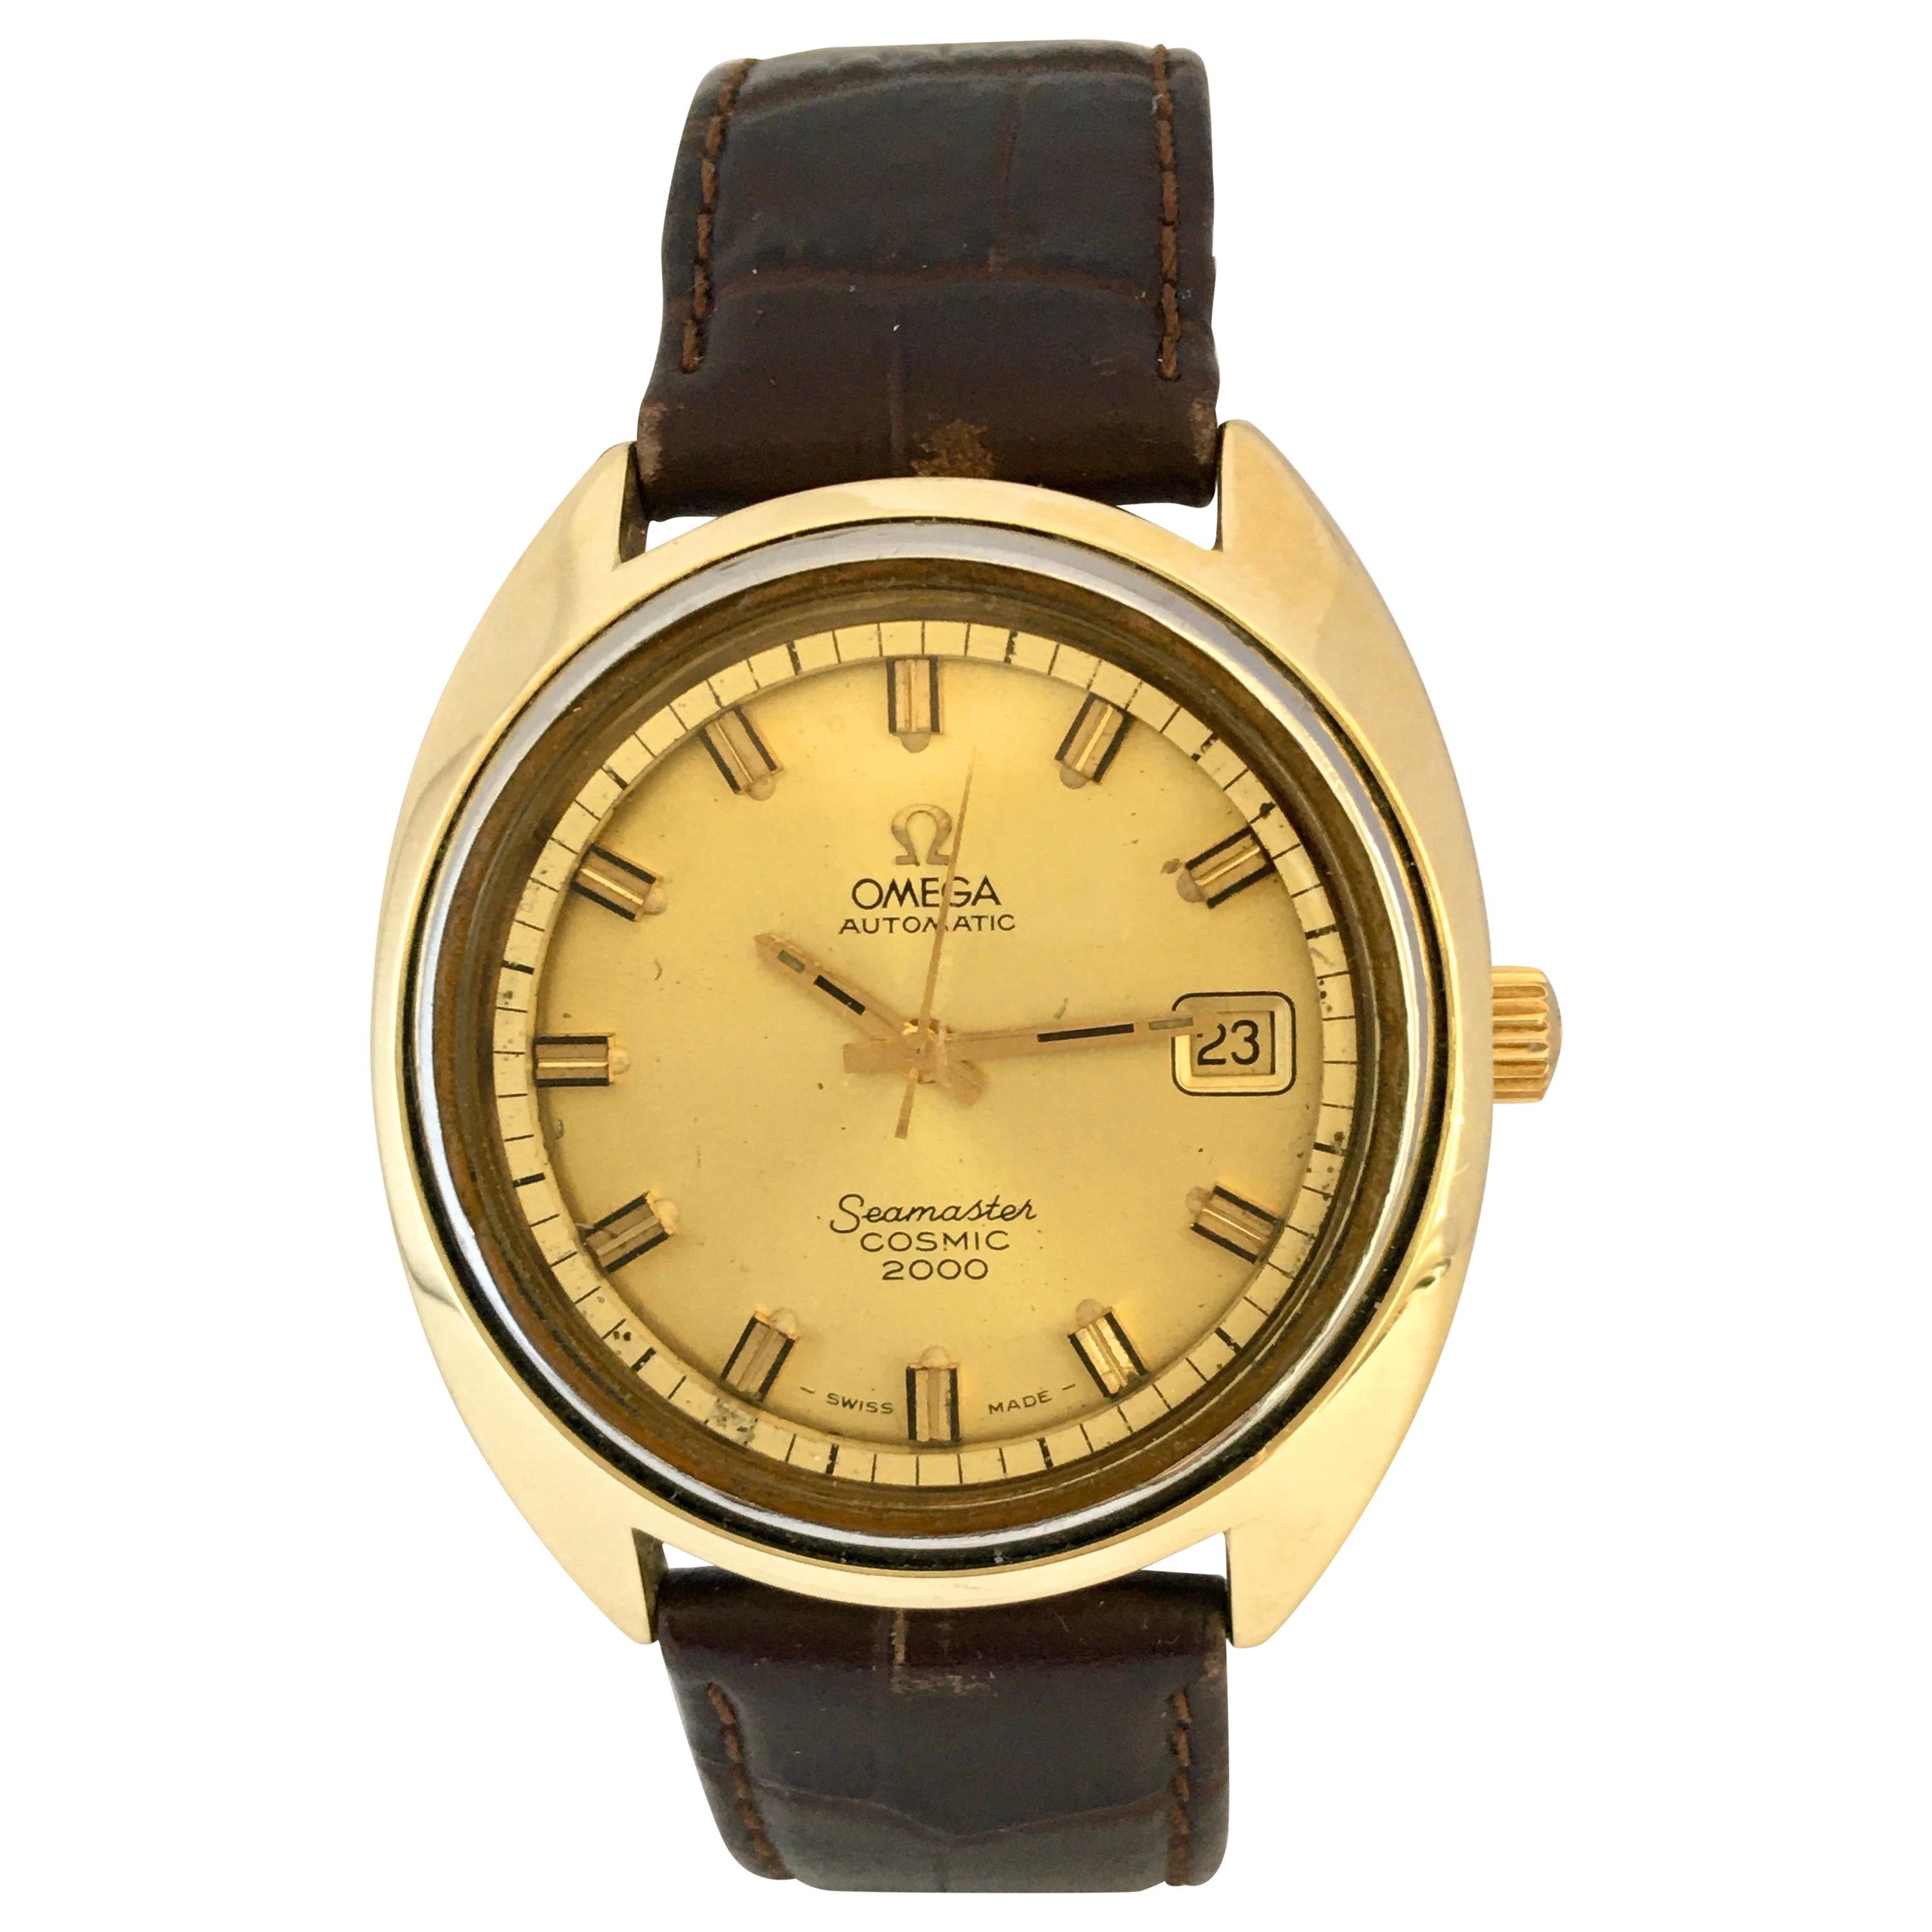 Vintage 1970s Gold-Plated SS Back Omega Automatic Seamaster Cosmic 2000 Watch For Sale